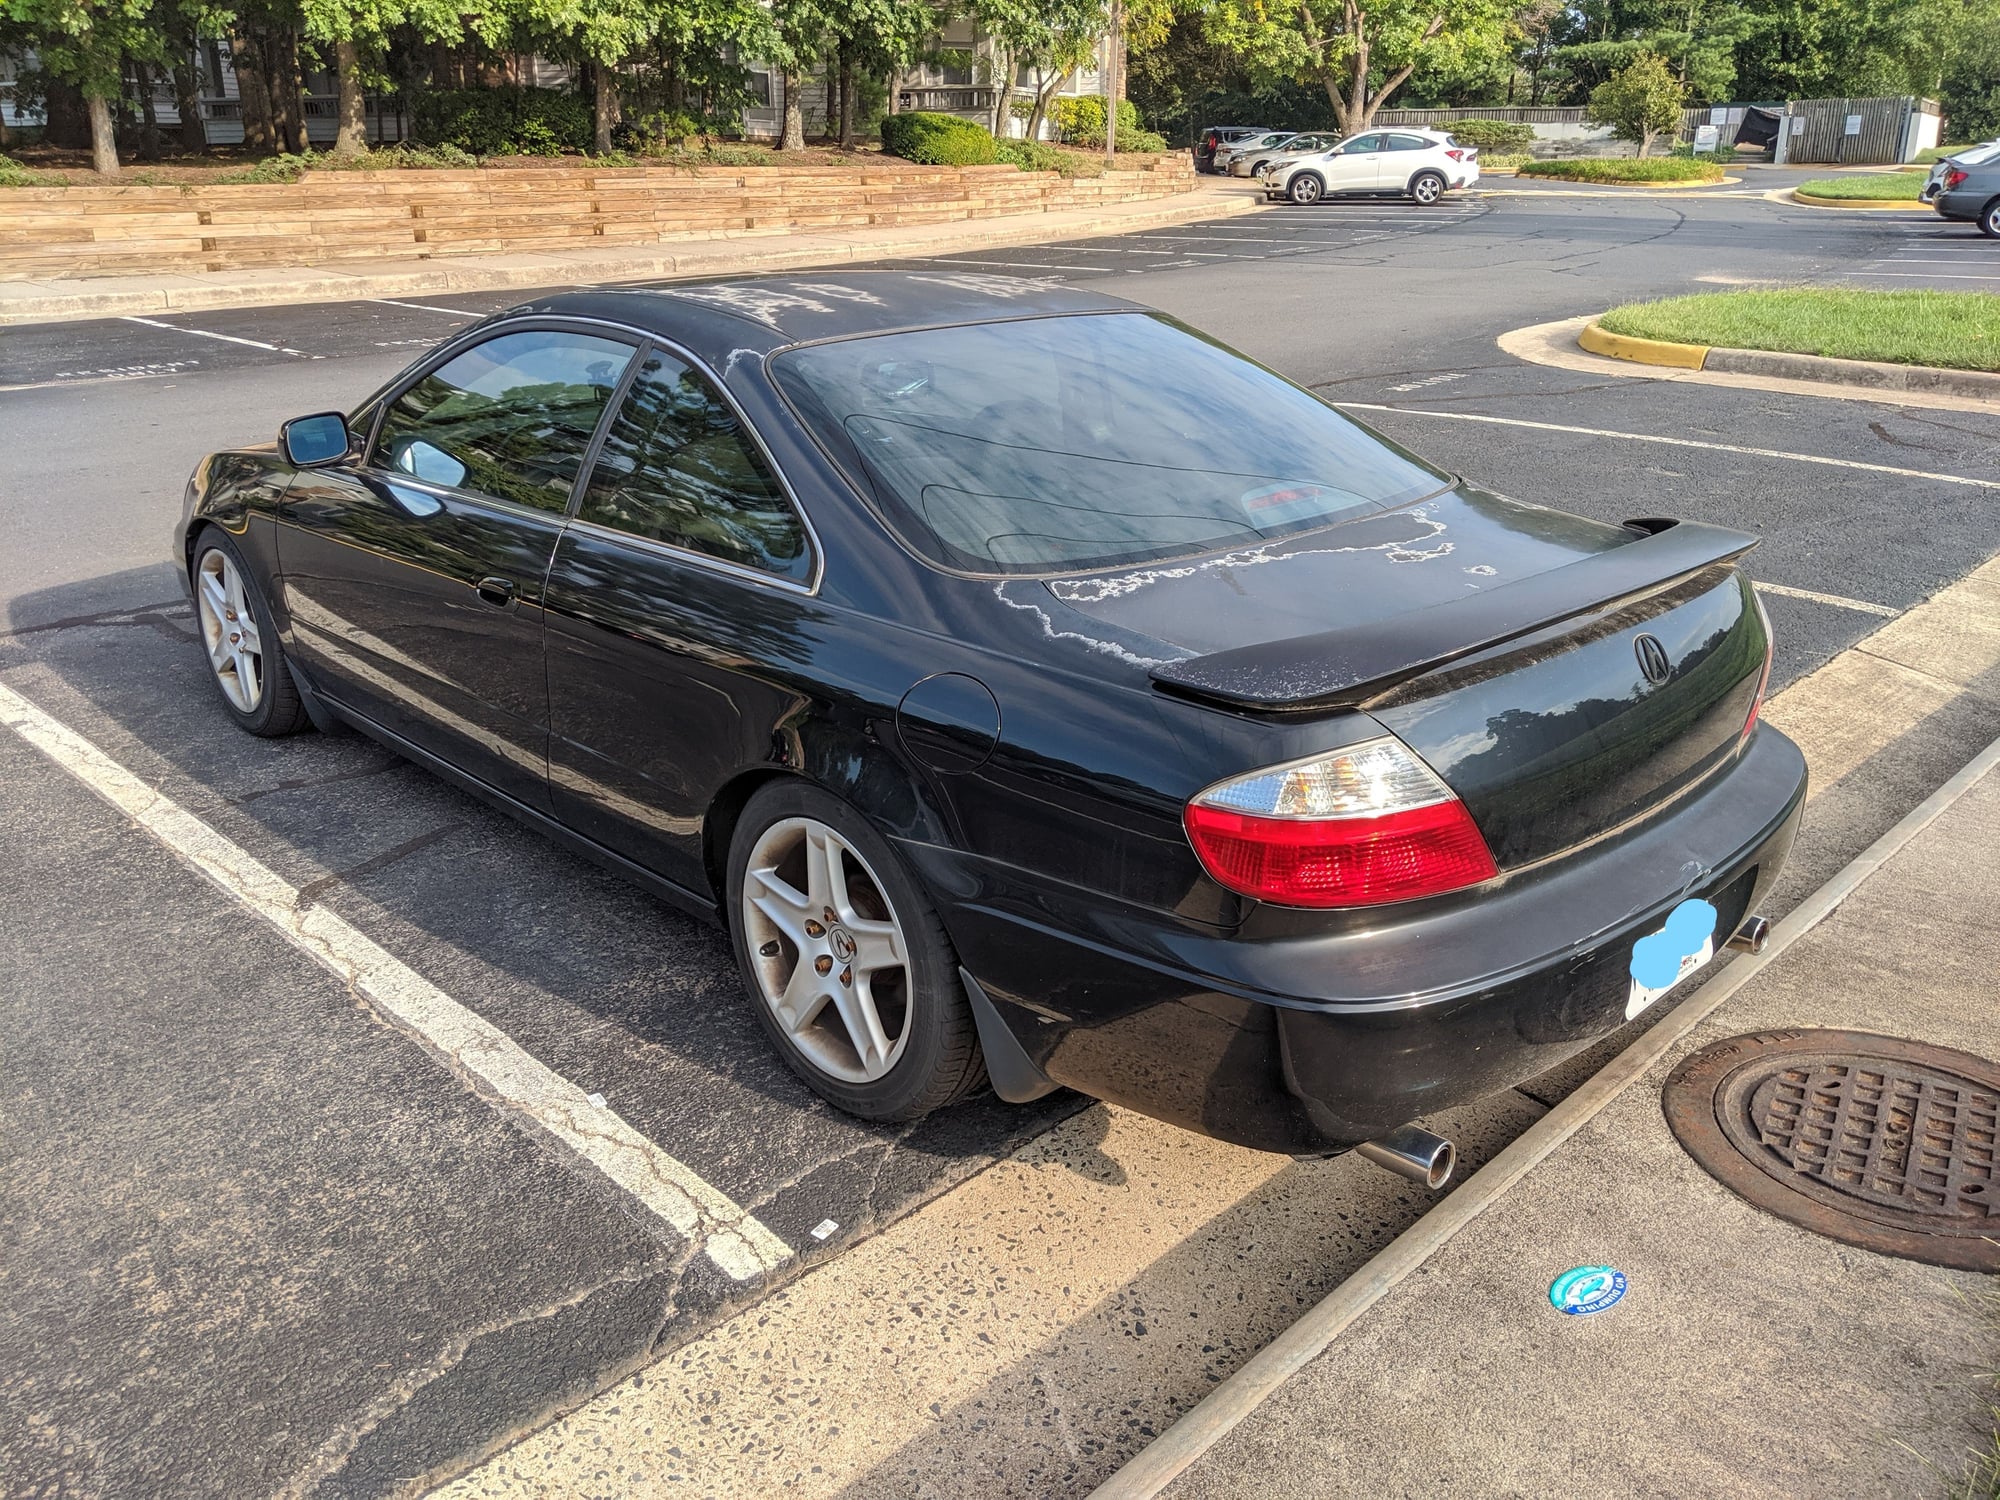 2003 Acura CL - SOLD: 2003 Acura CL Type-S 6 Speed - Used - VIN 19UYA41613A000941 - 187,000 Miles - 6 cyl - 2WD - Manual - Coupe - Black - Fairfax, VA 22033, United States